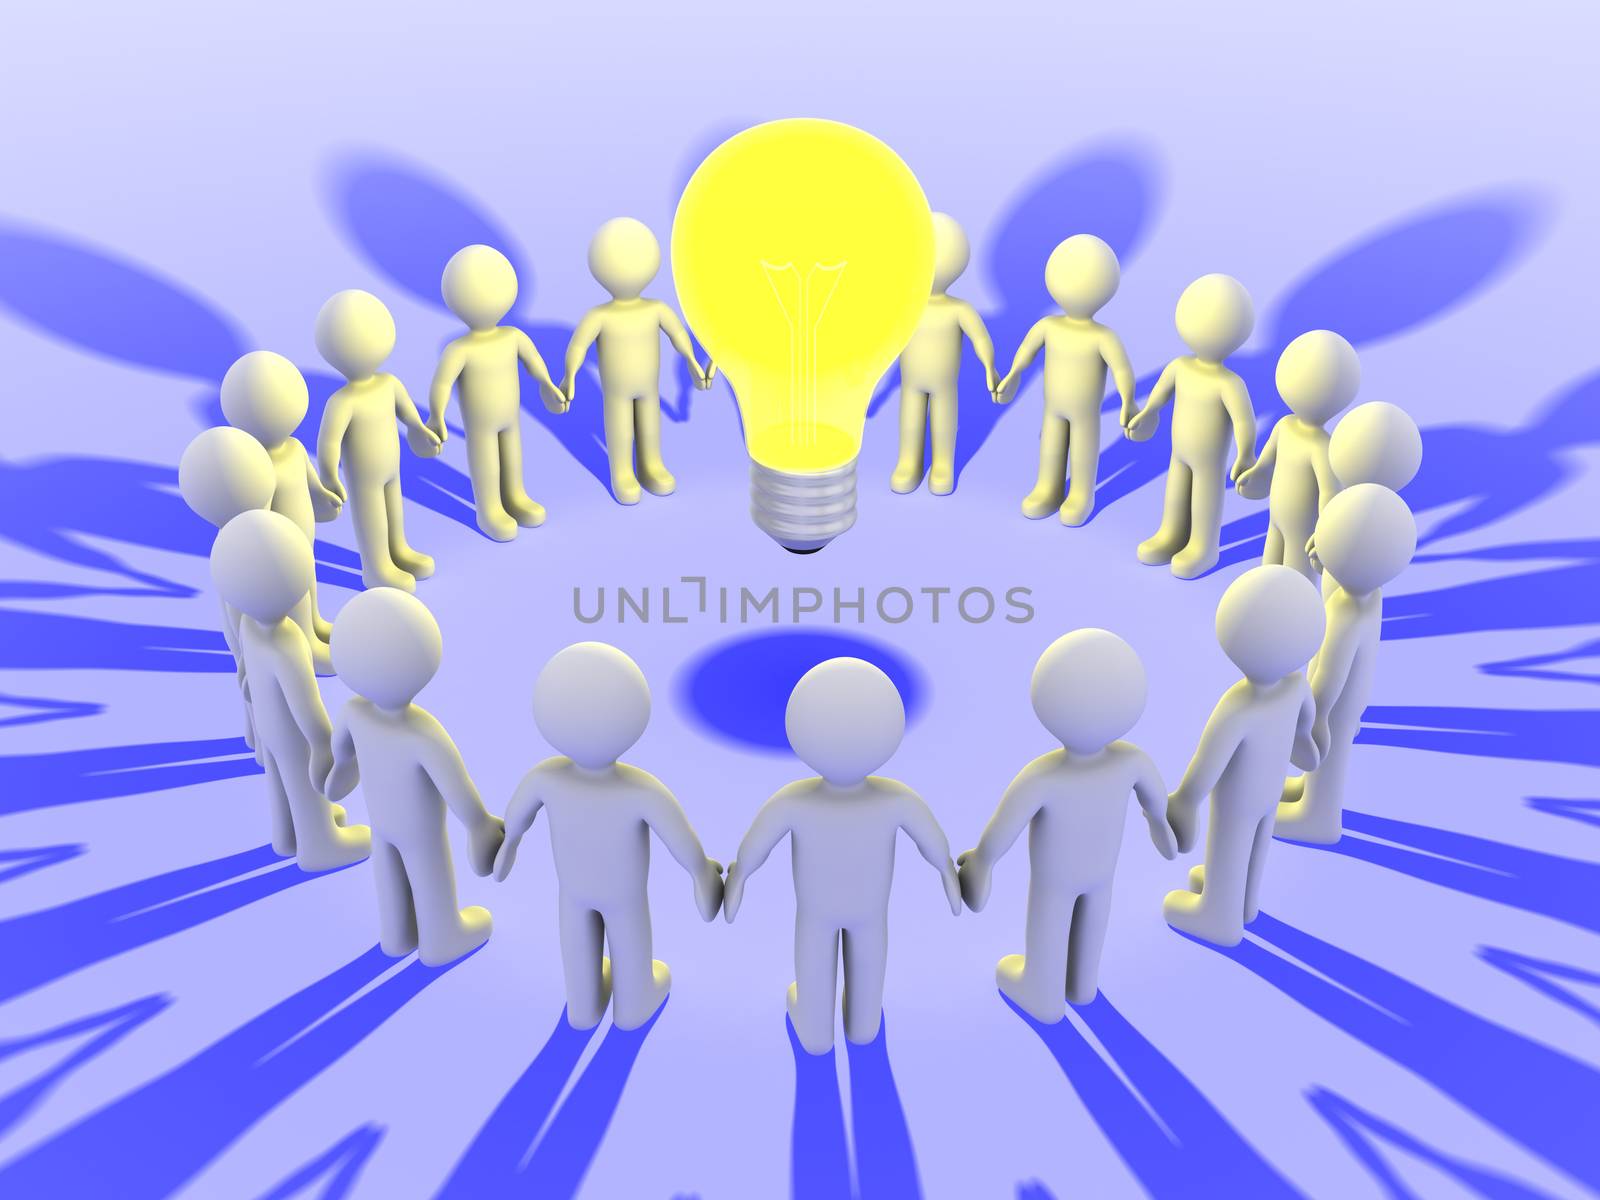 3d people form a circle around a light bulb